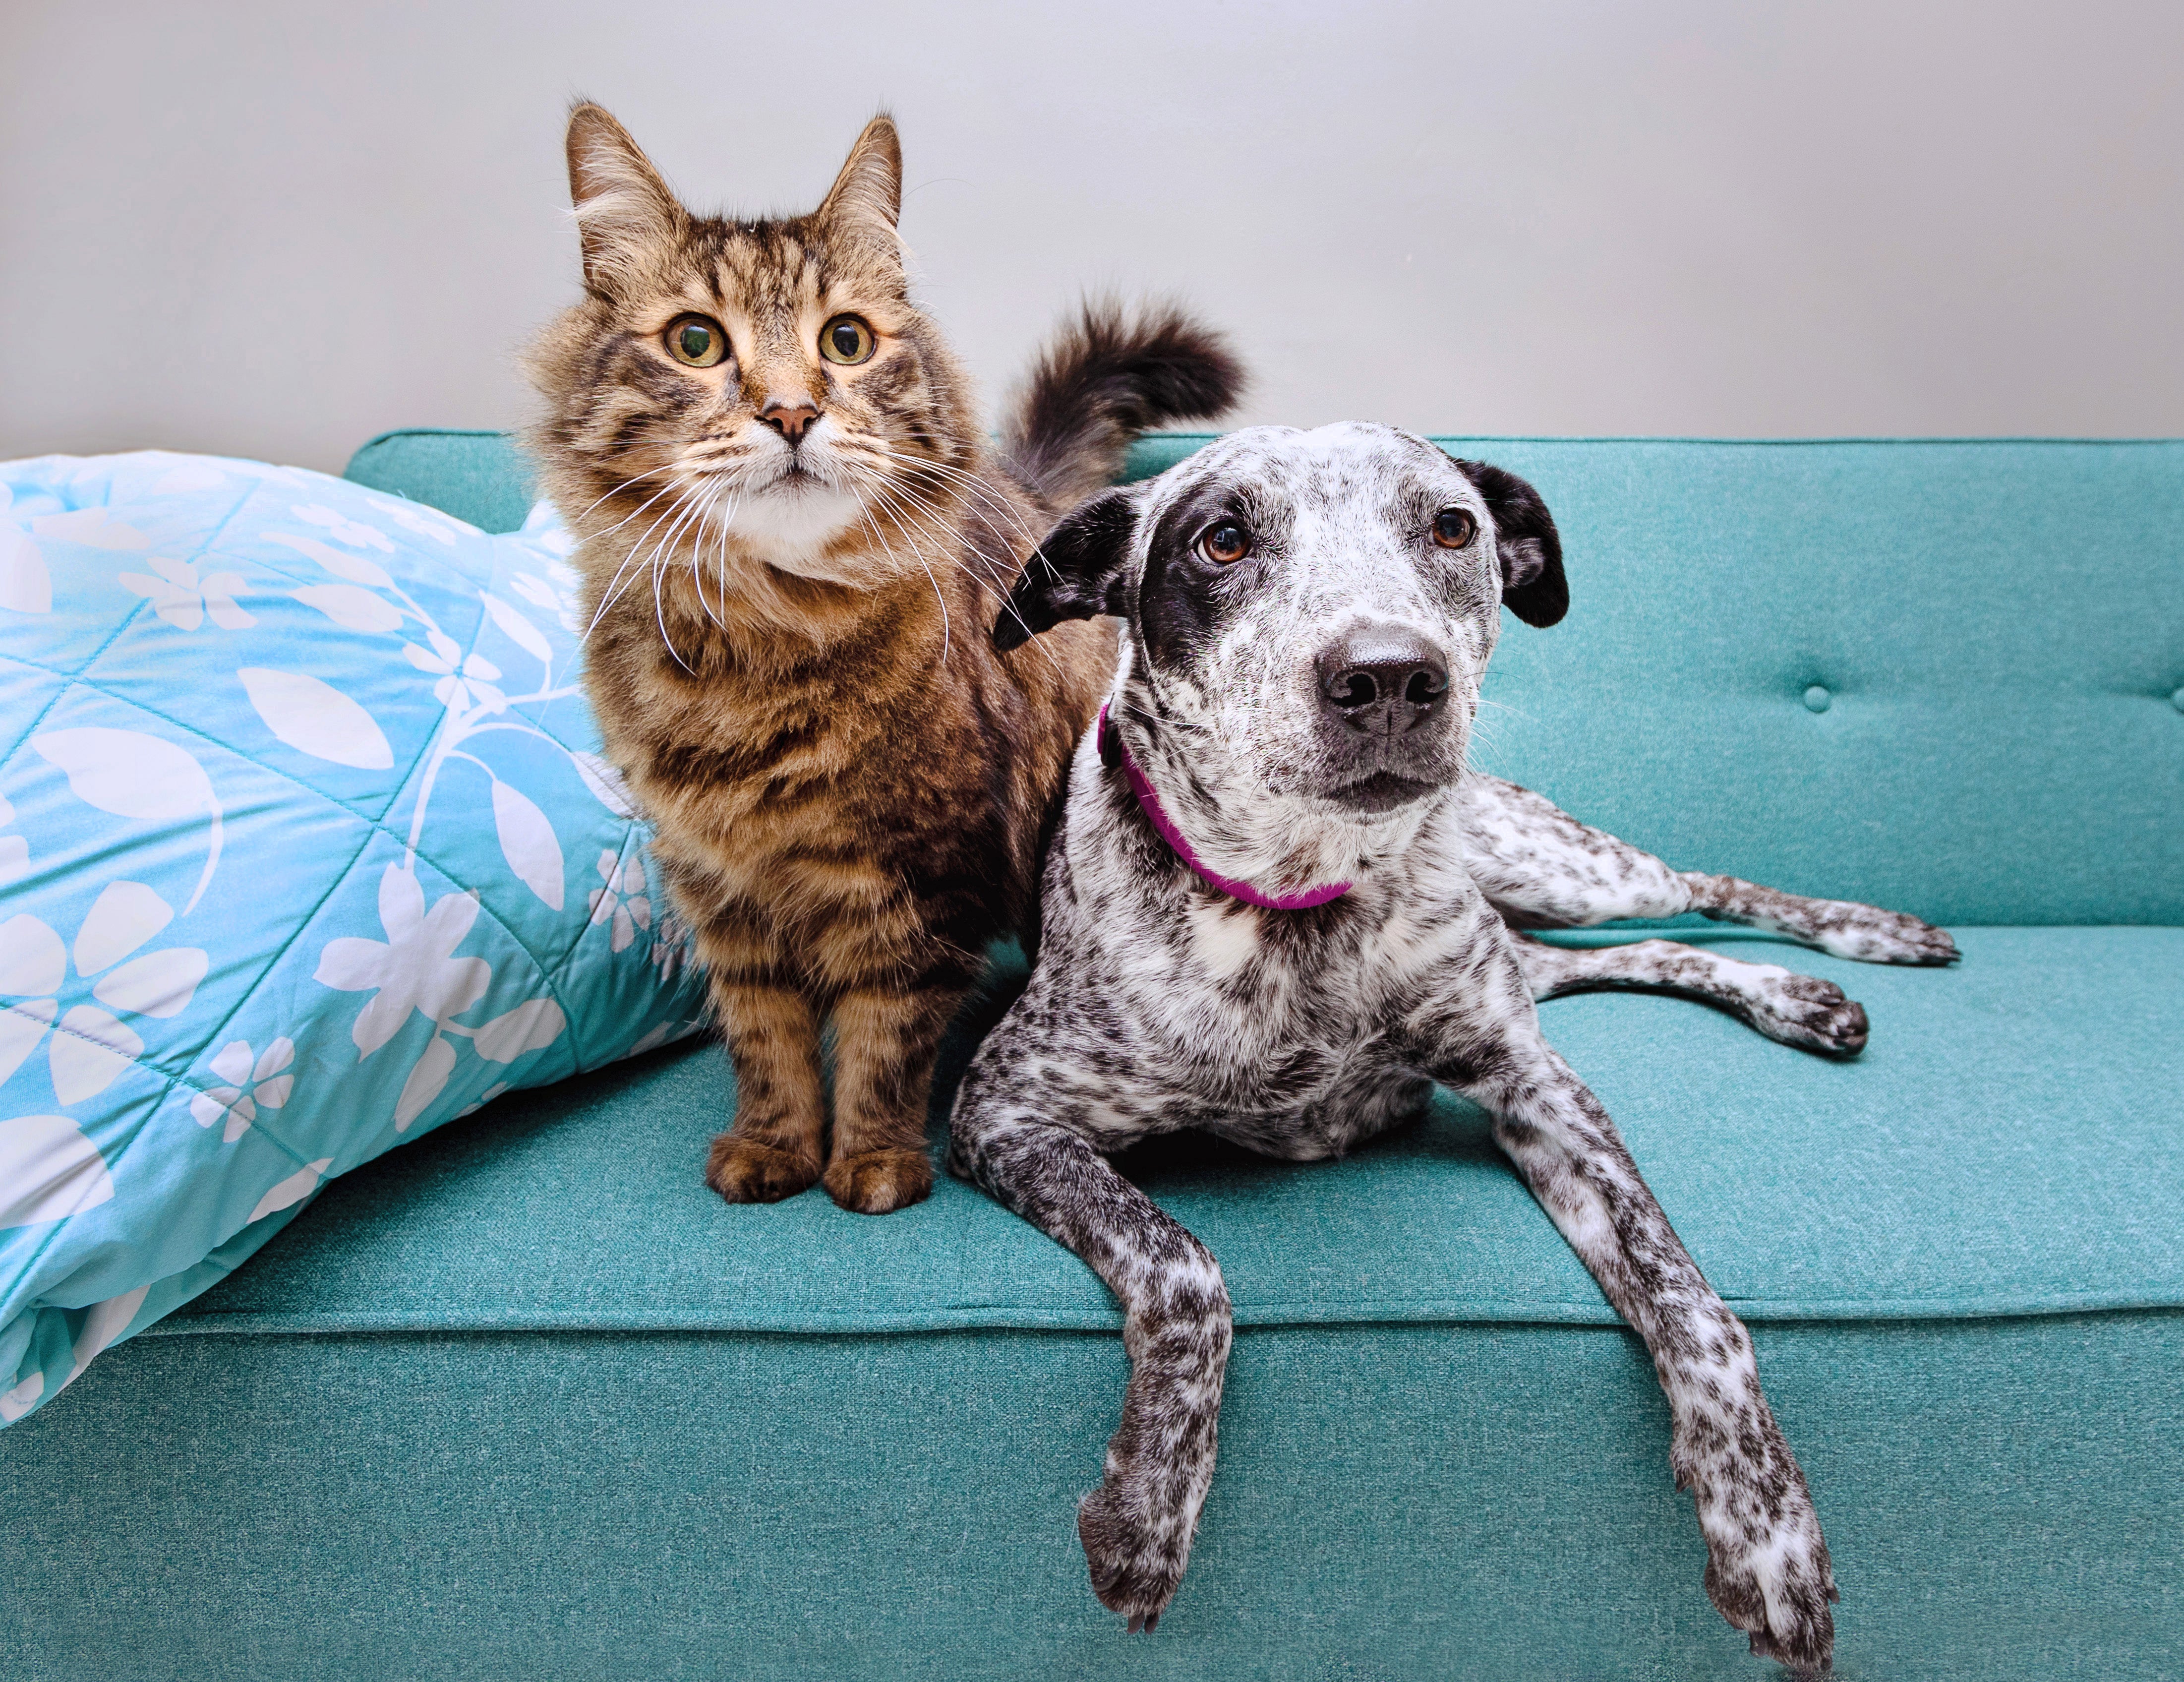 Dog and cat sitting together on a blue couch